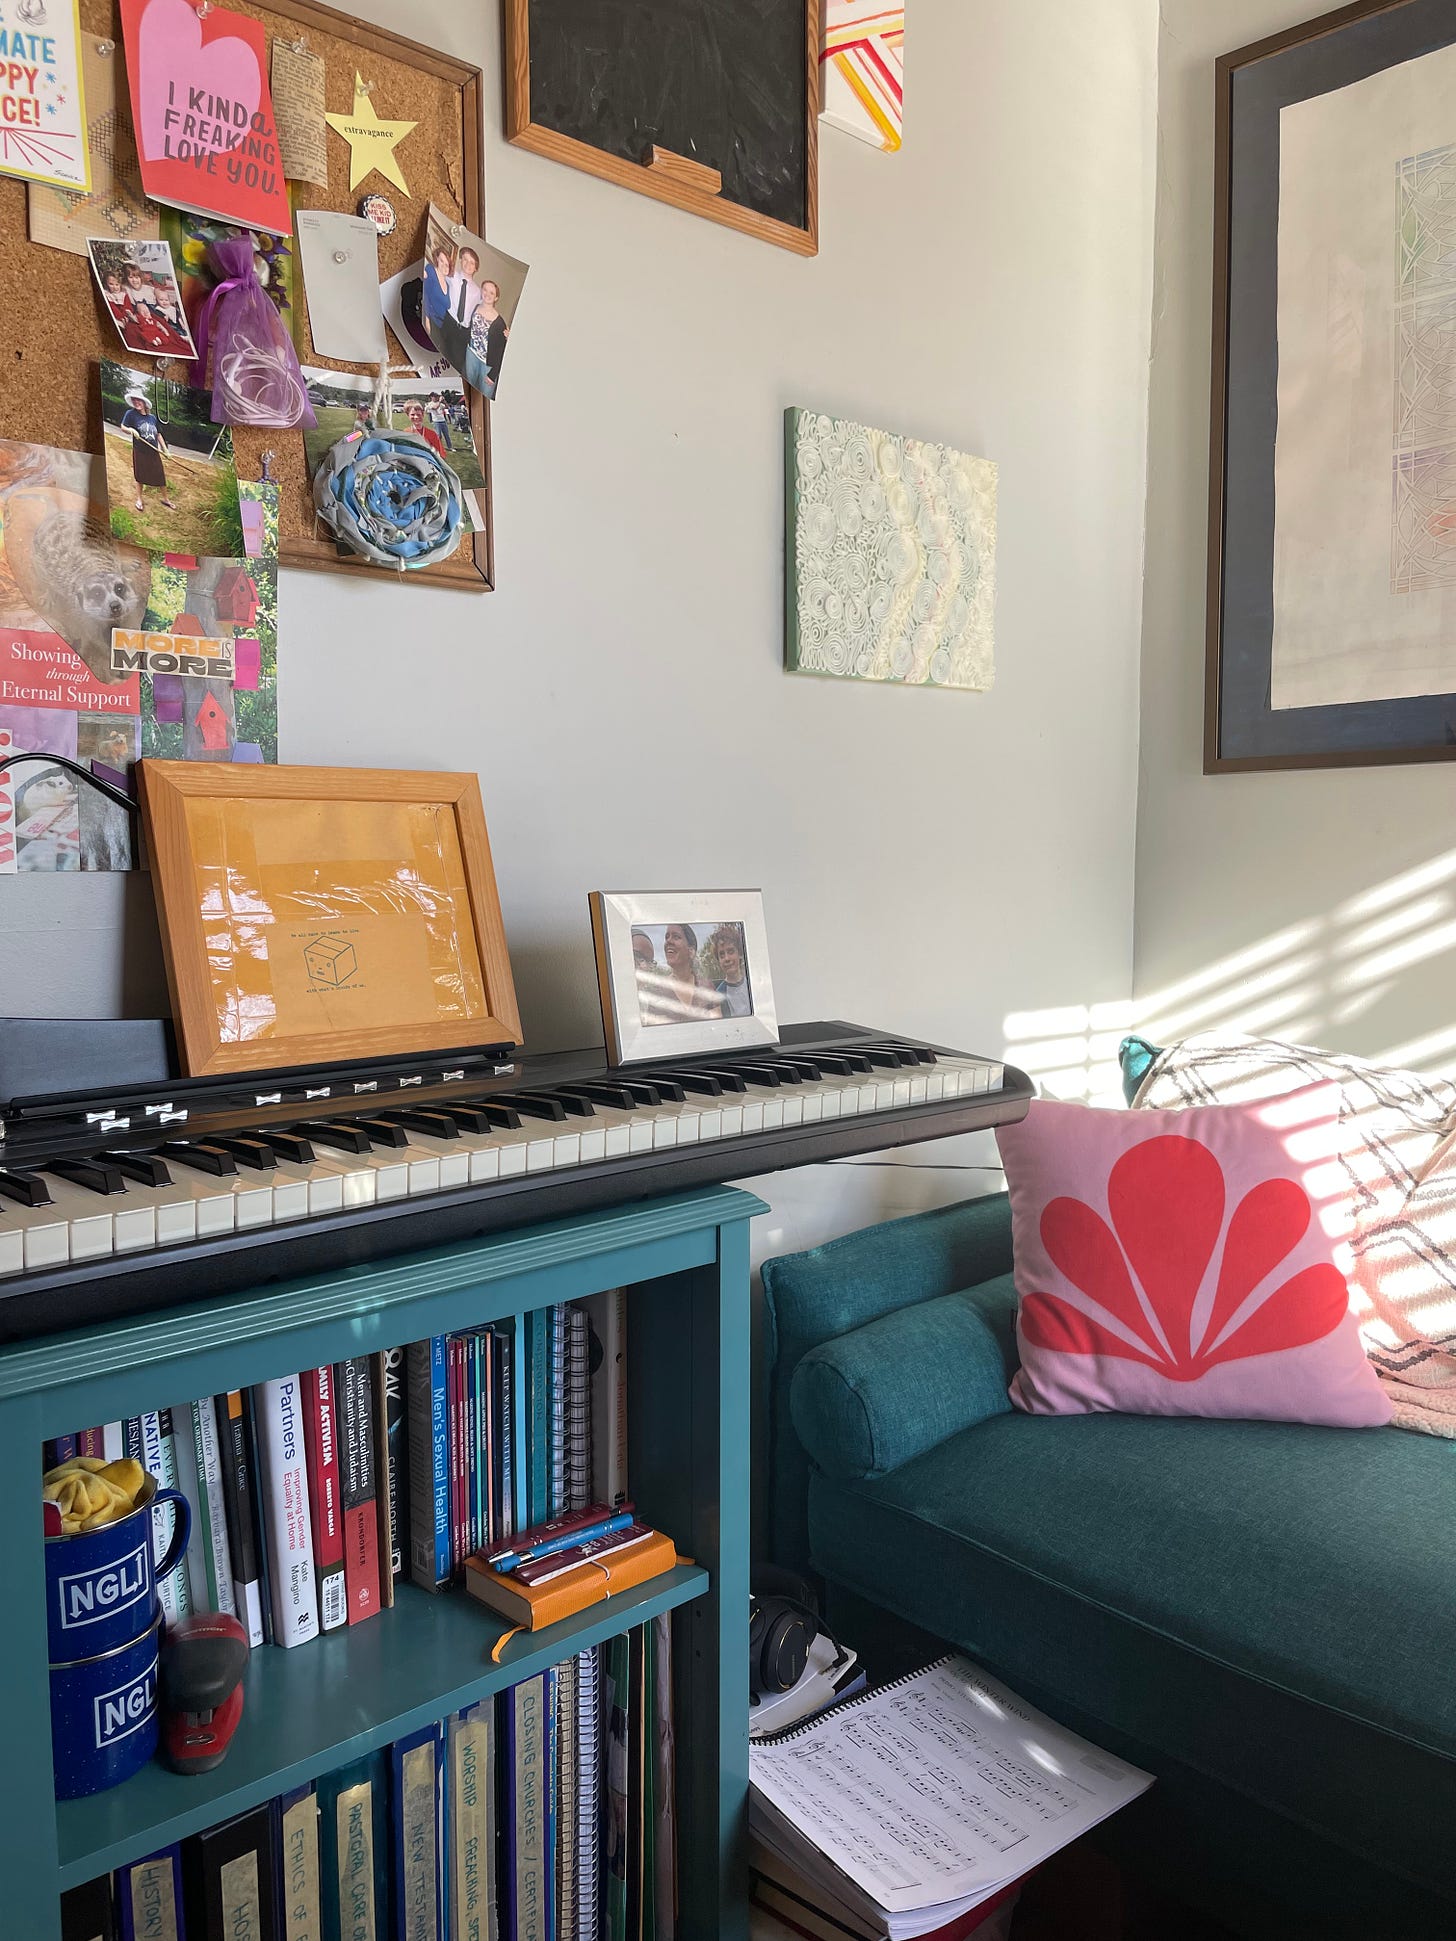 A keyboard sits on a blue bookshelf.  There is a color array of cards on a corkboard above it and a matching blue loveseat to the right.